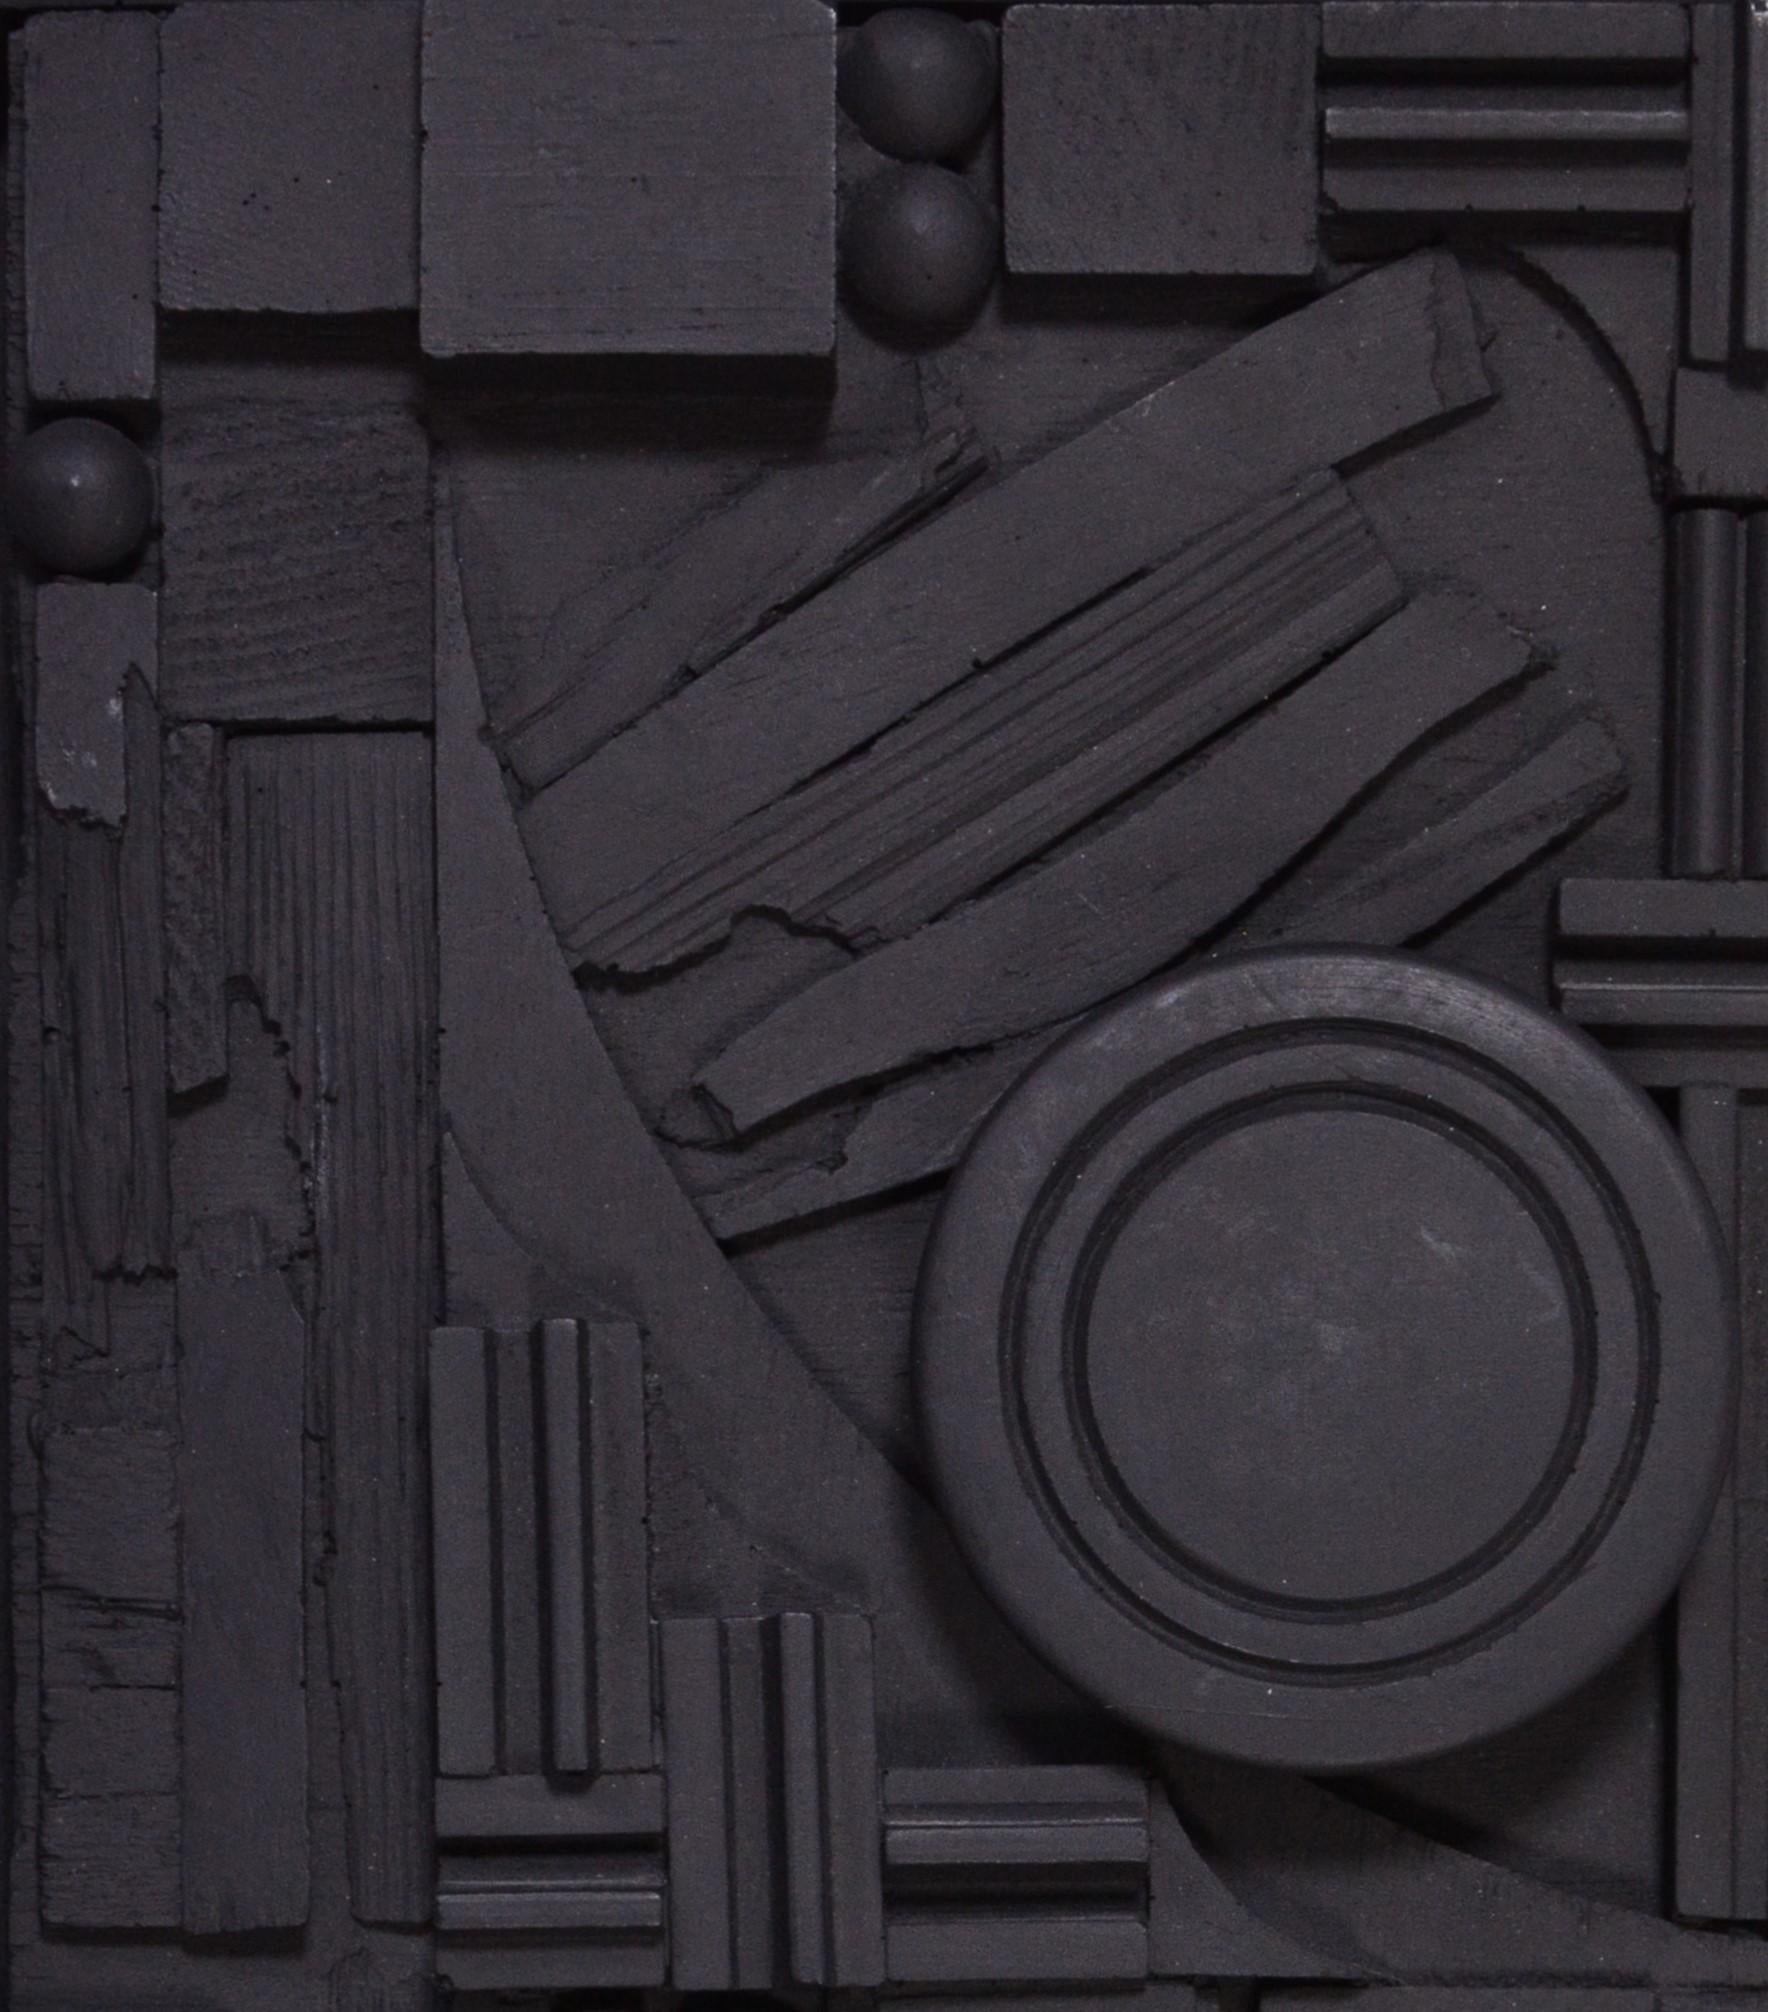 Louise Nevelson, City-Sunscape, 1979 2